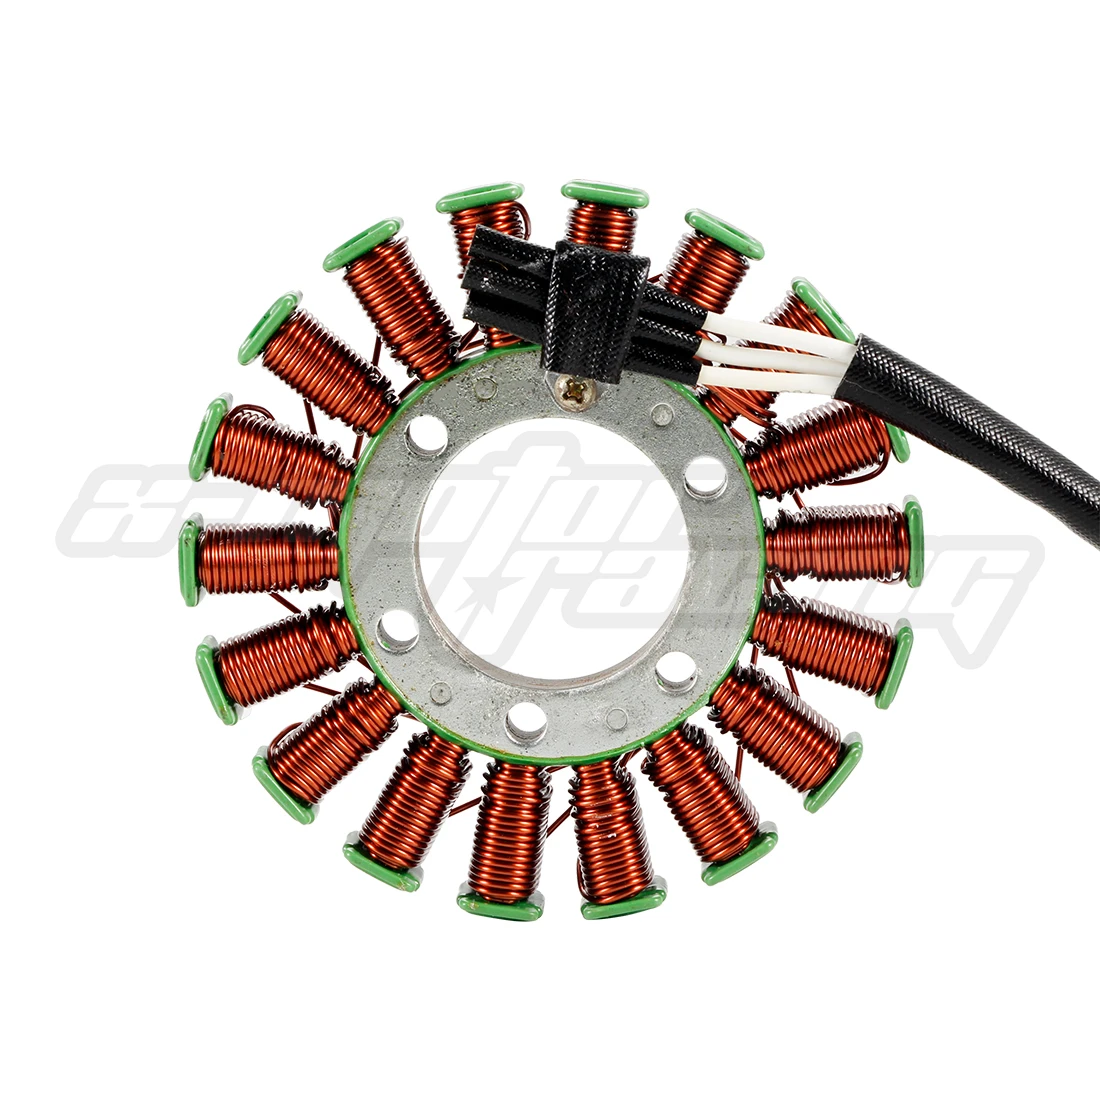 Motorcycle Generator Magneto Stator Coil For Yamaha YZF R6 2006-2016 2C0-81410-00-00 2C0-81410-01-00 enlarge